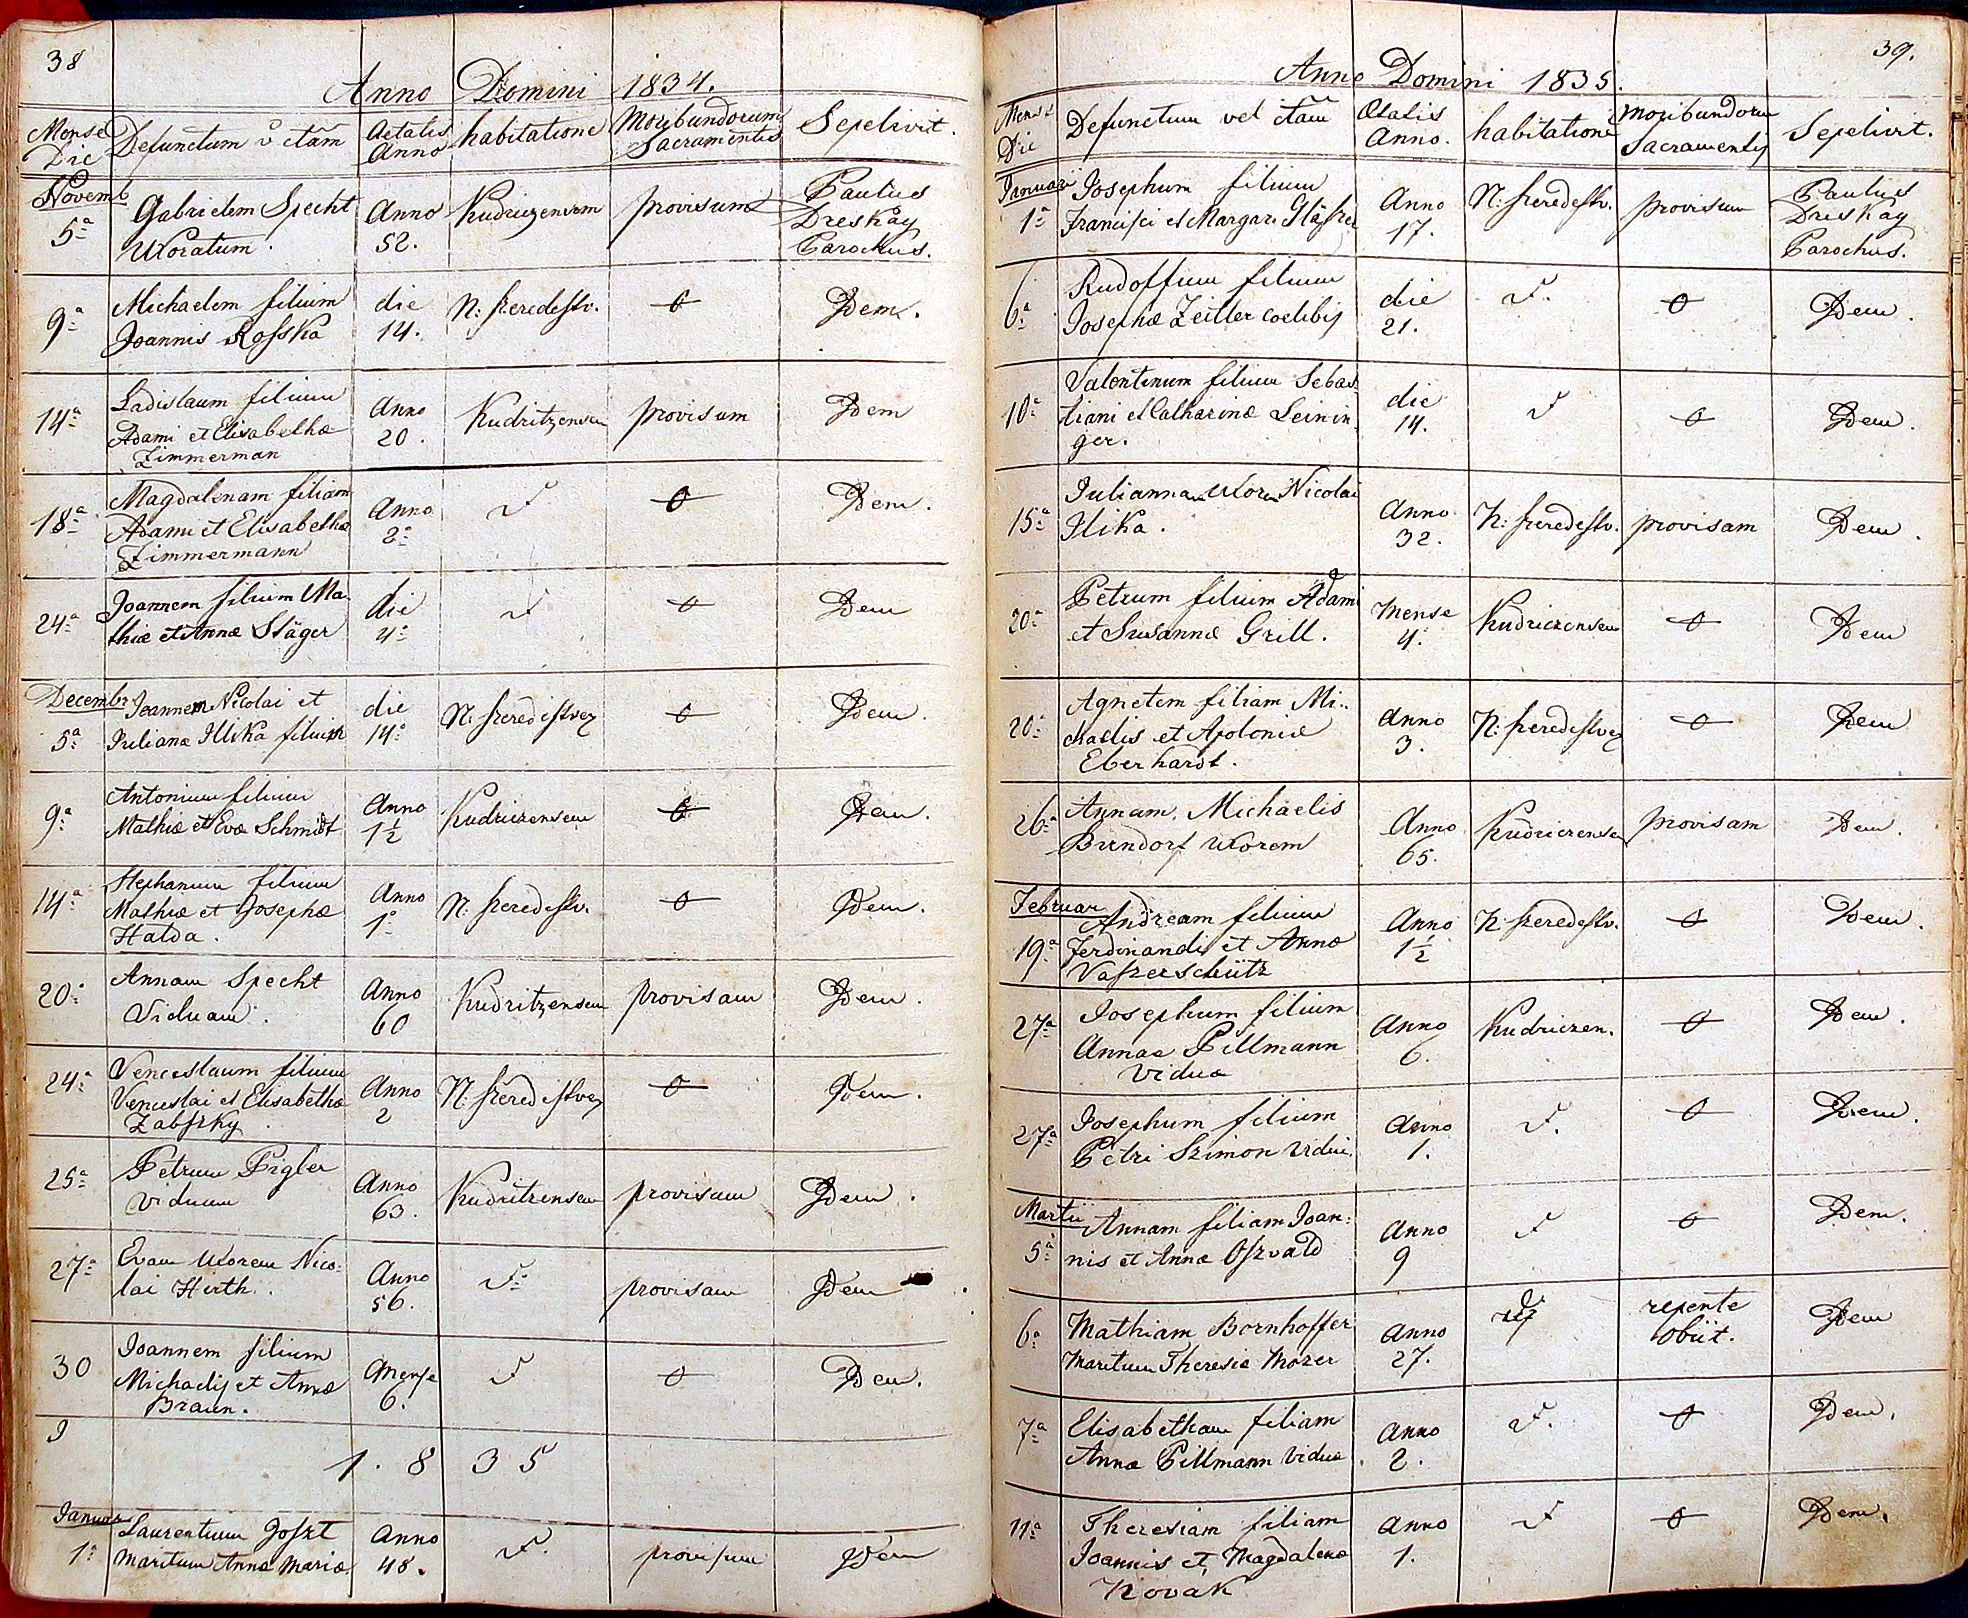 images/church_records/DEATHS/1775-1828D/038 i 039